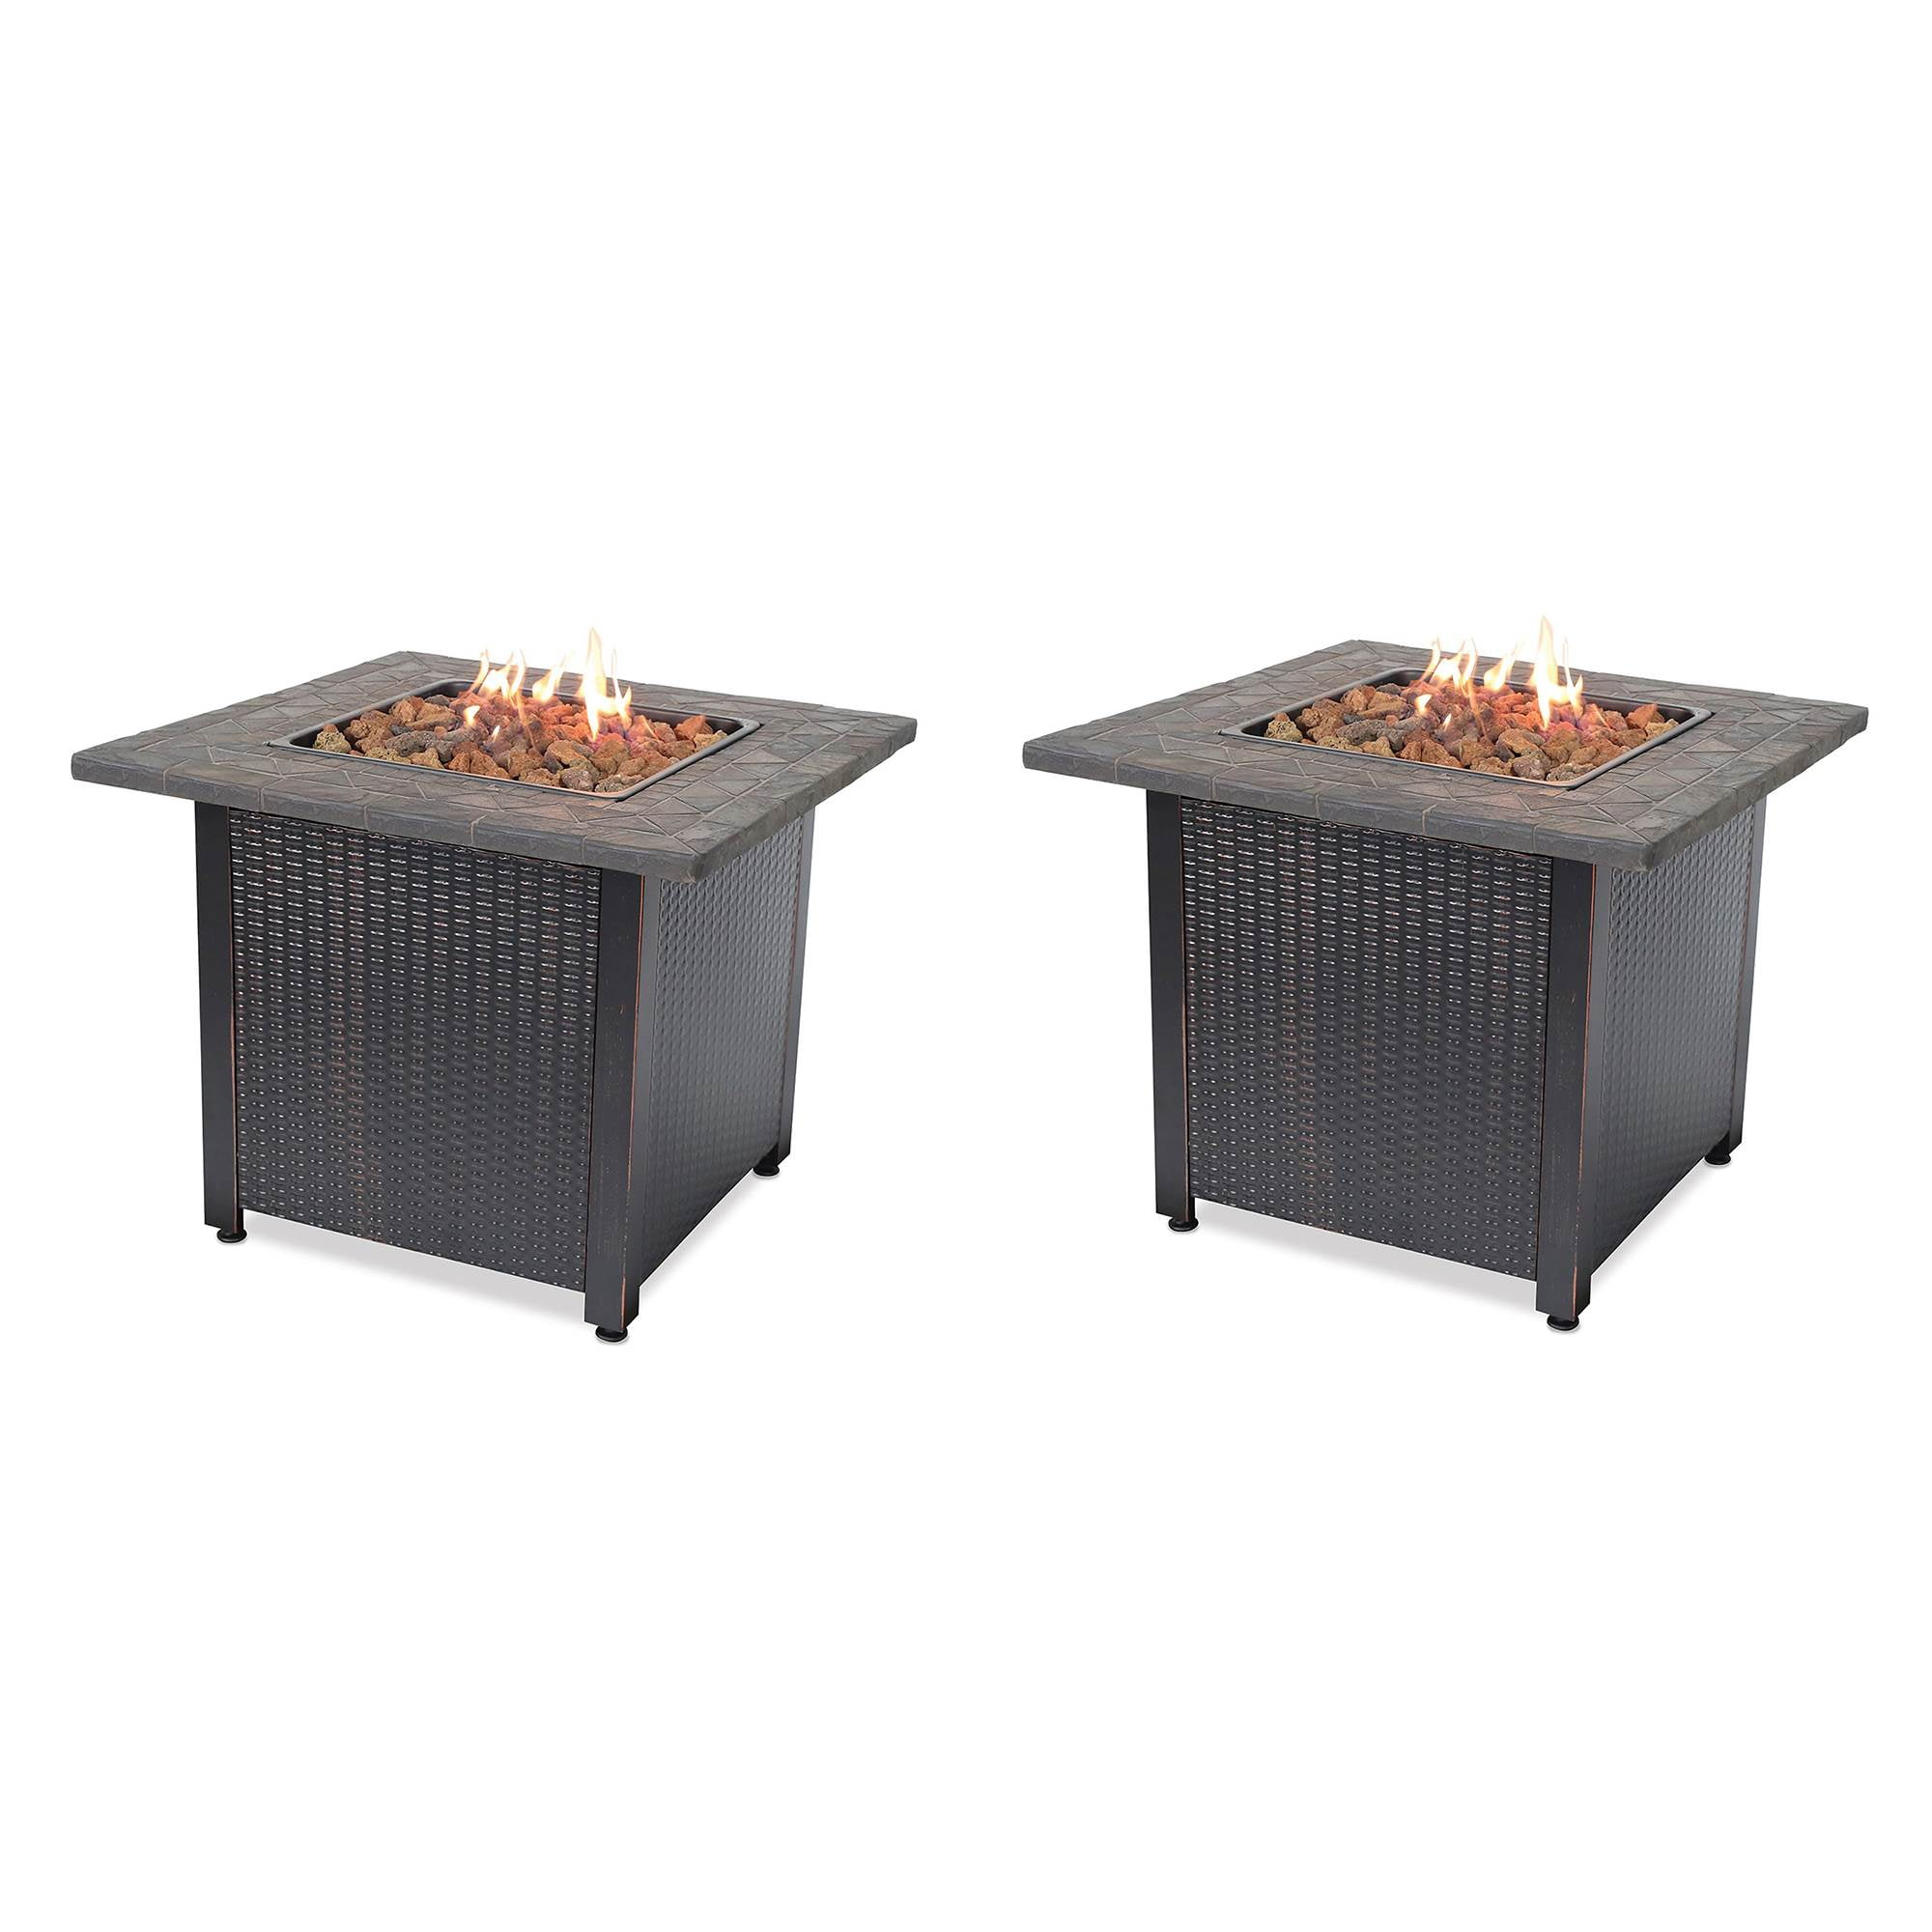 Details about   Blue Rhino Fire Table 30 In Endless Summer Square LP Gas with Faux Stone Hearth 